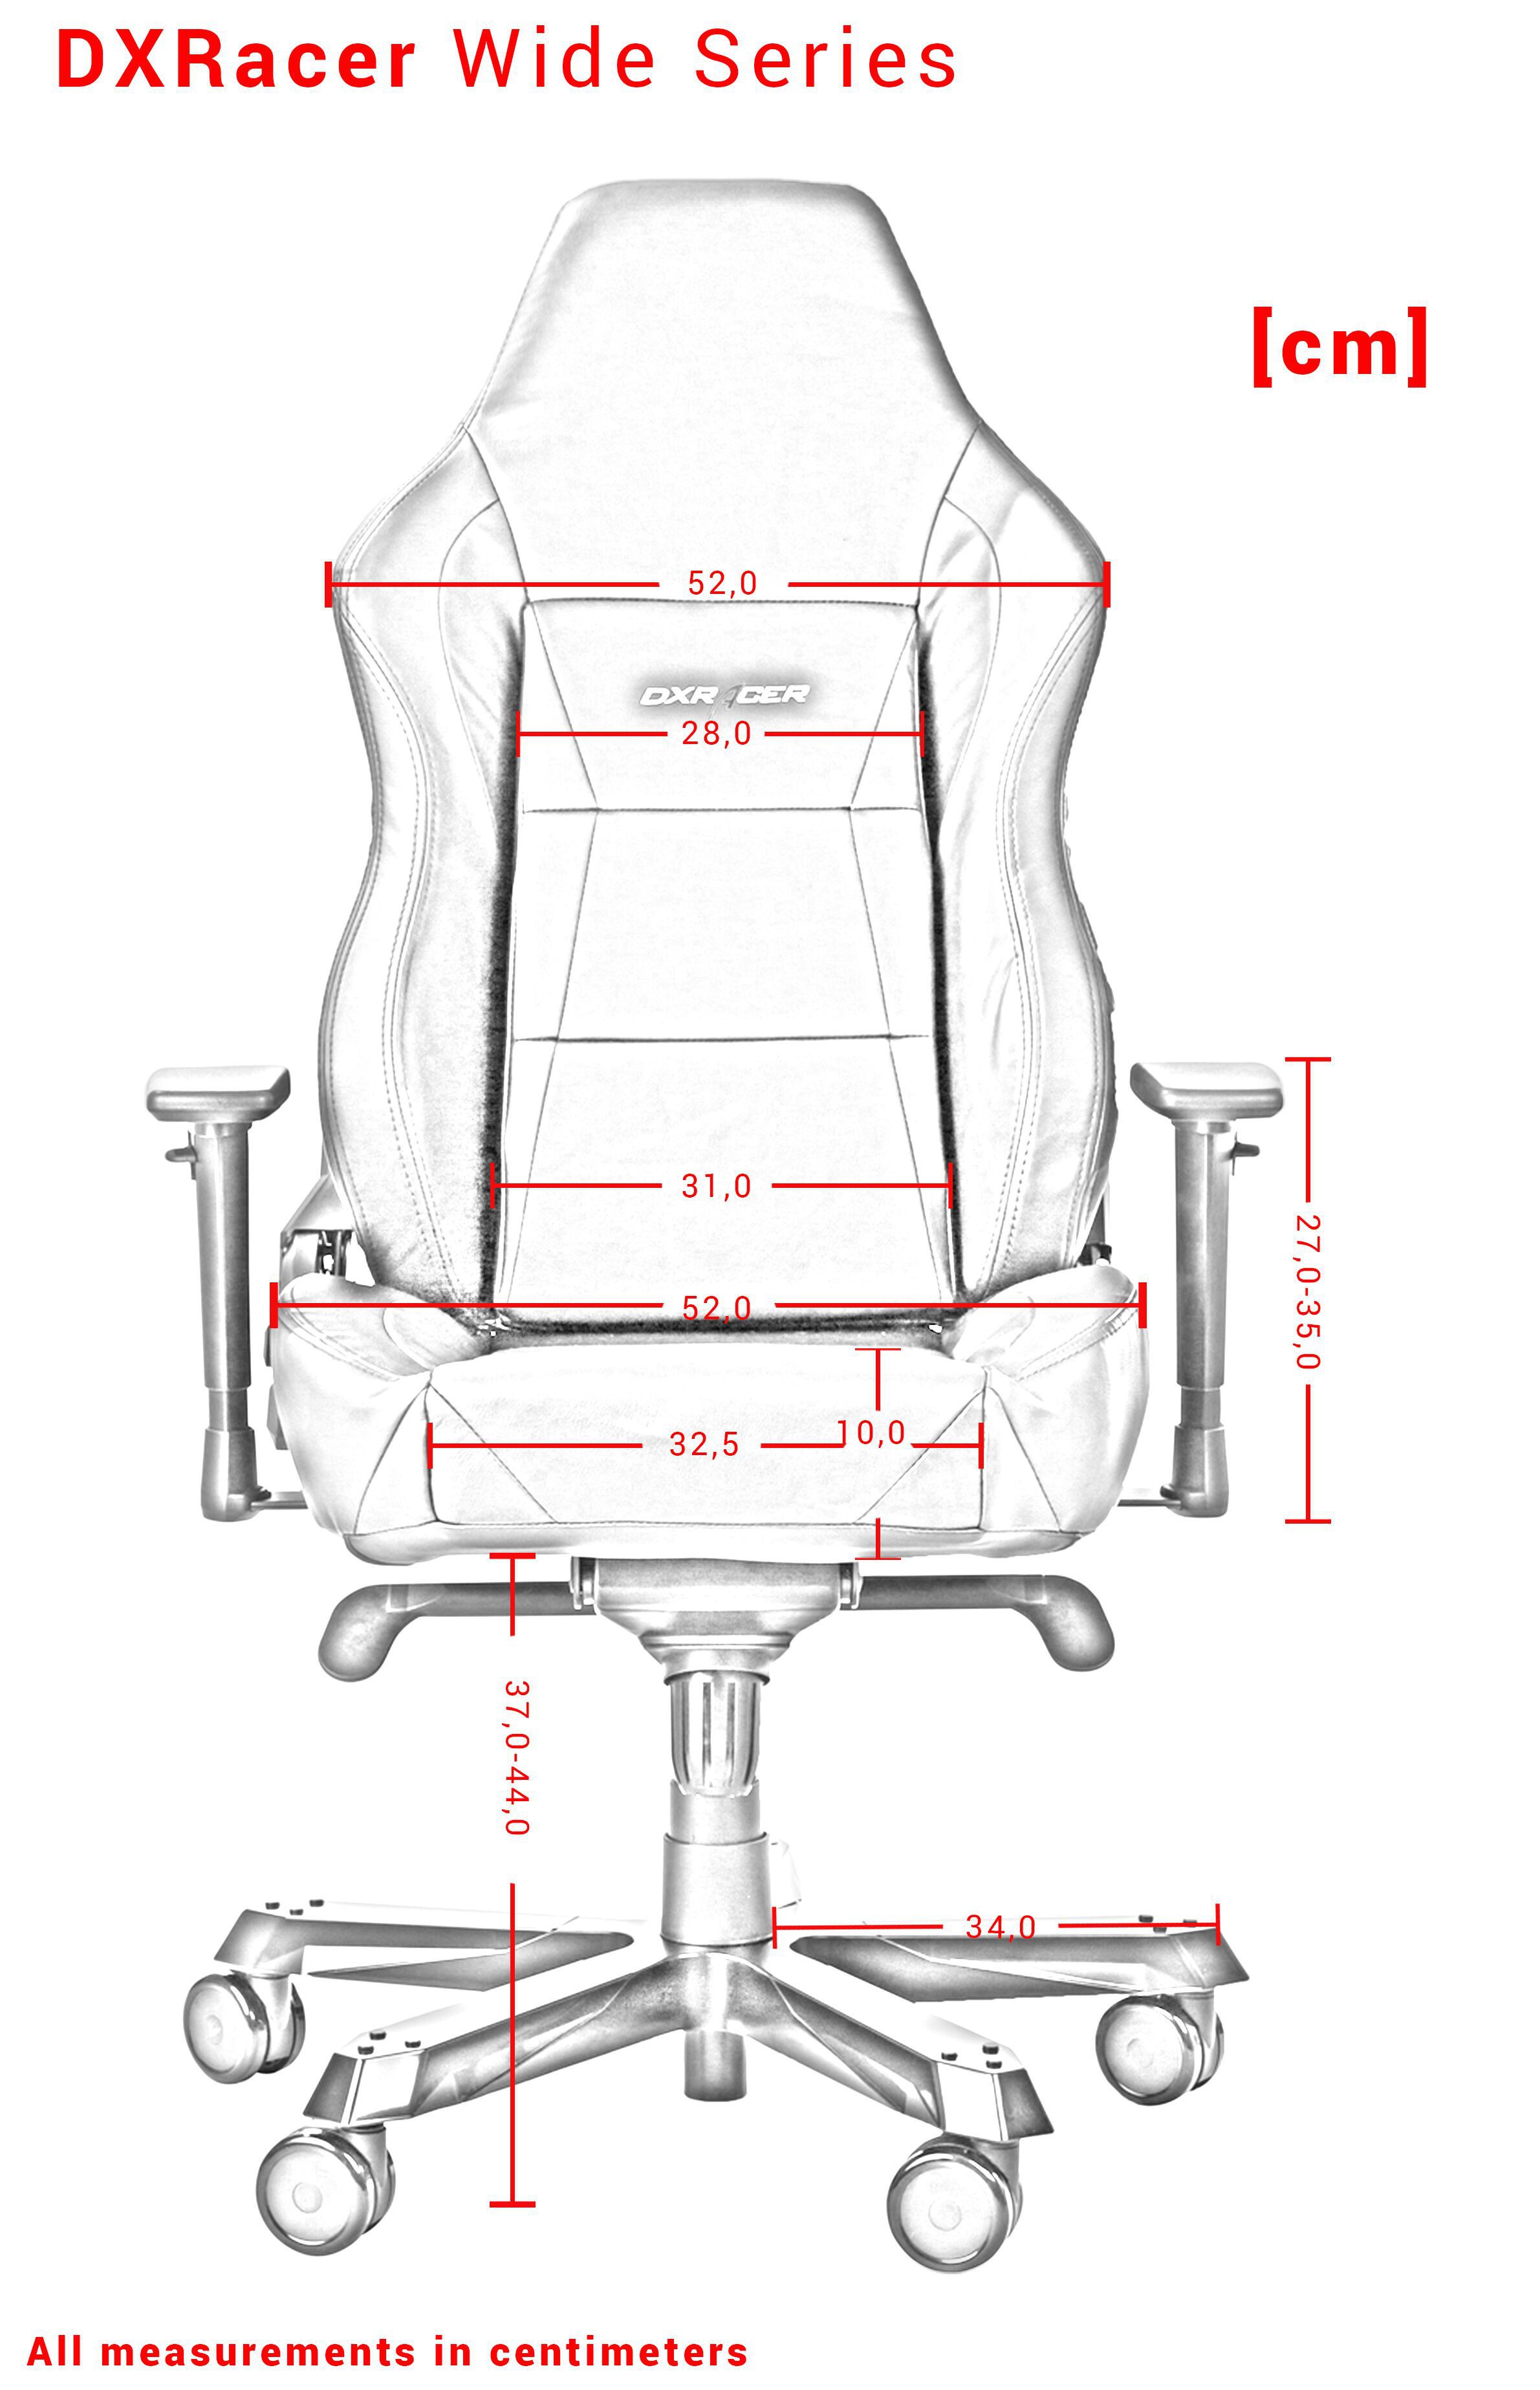 DXRACER WORK SERIES W0-NR RED GAMING CHAIR